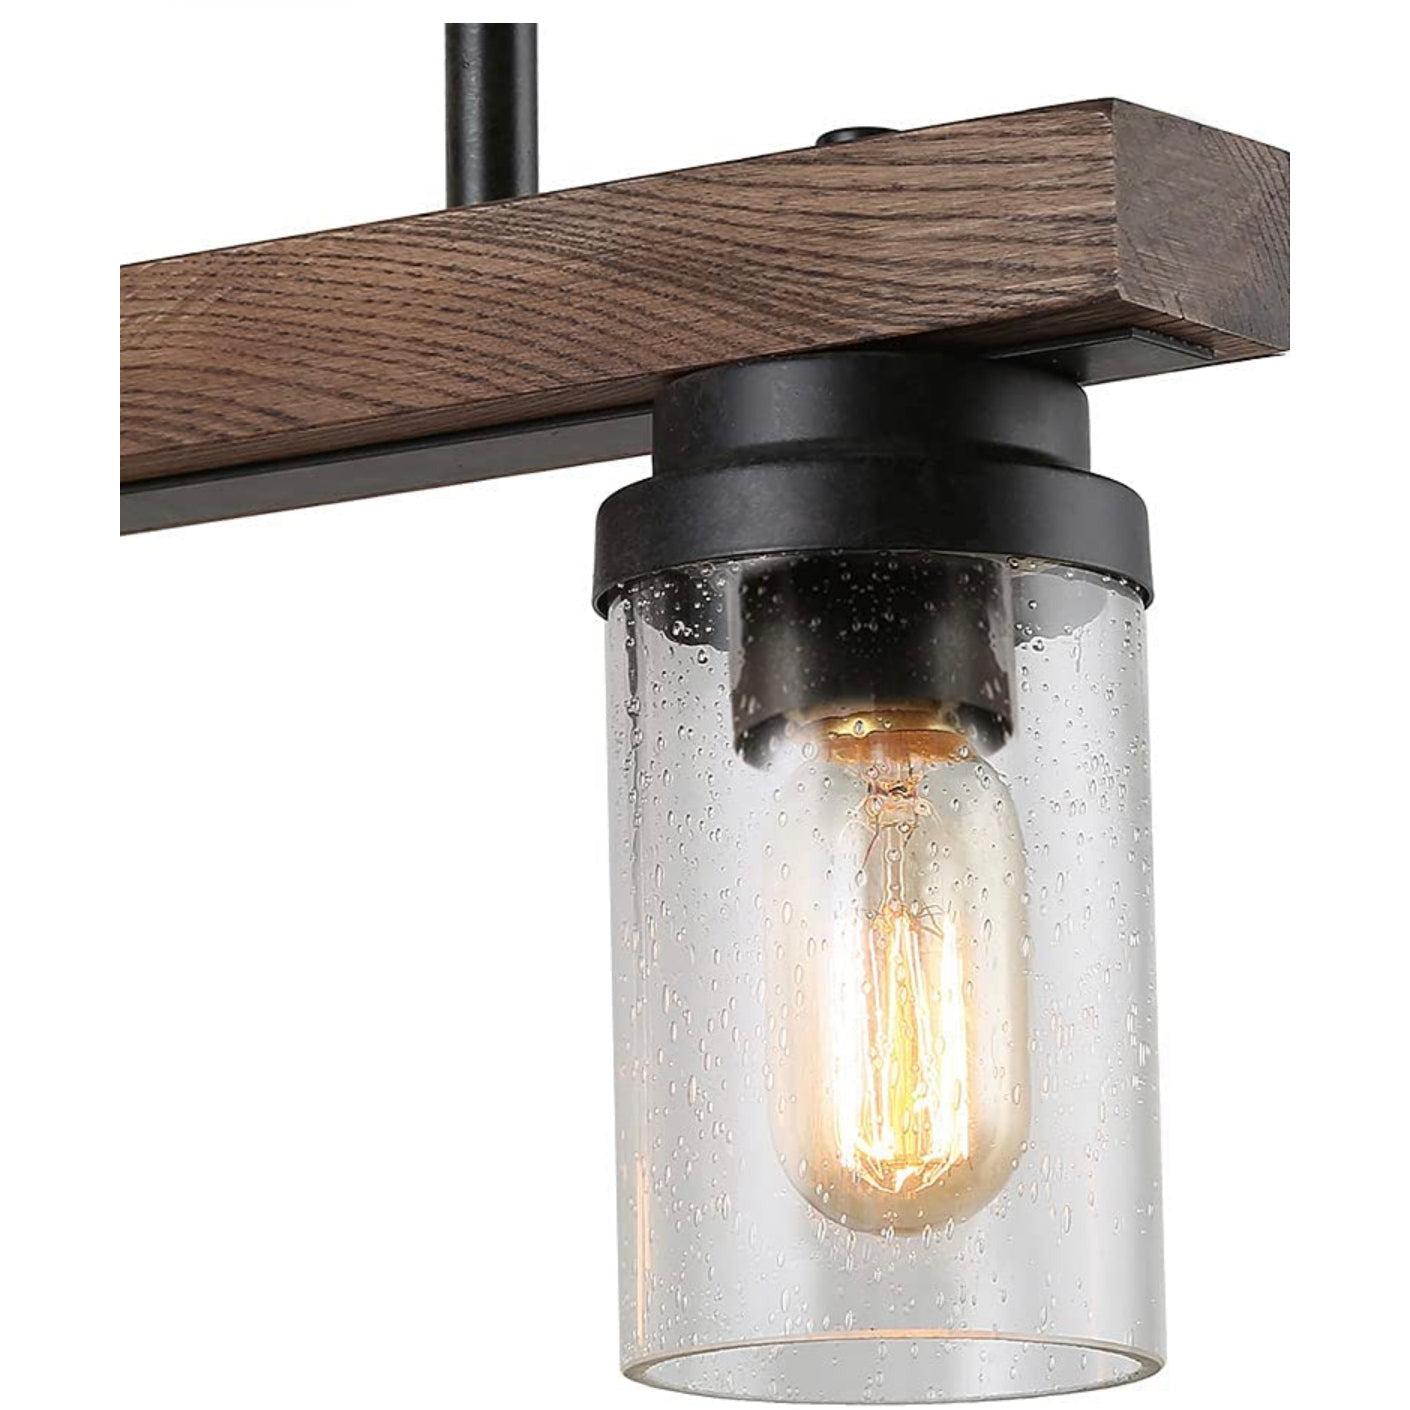 Anmytek Kitchen Island Pendant Lighting with Bubble Glass Shade Industrial Rustic Chandelier Retro Ceiling Light or Edison Vintage Hanging Light Fixture 5-Lights (C0039) - Selzalot